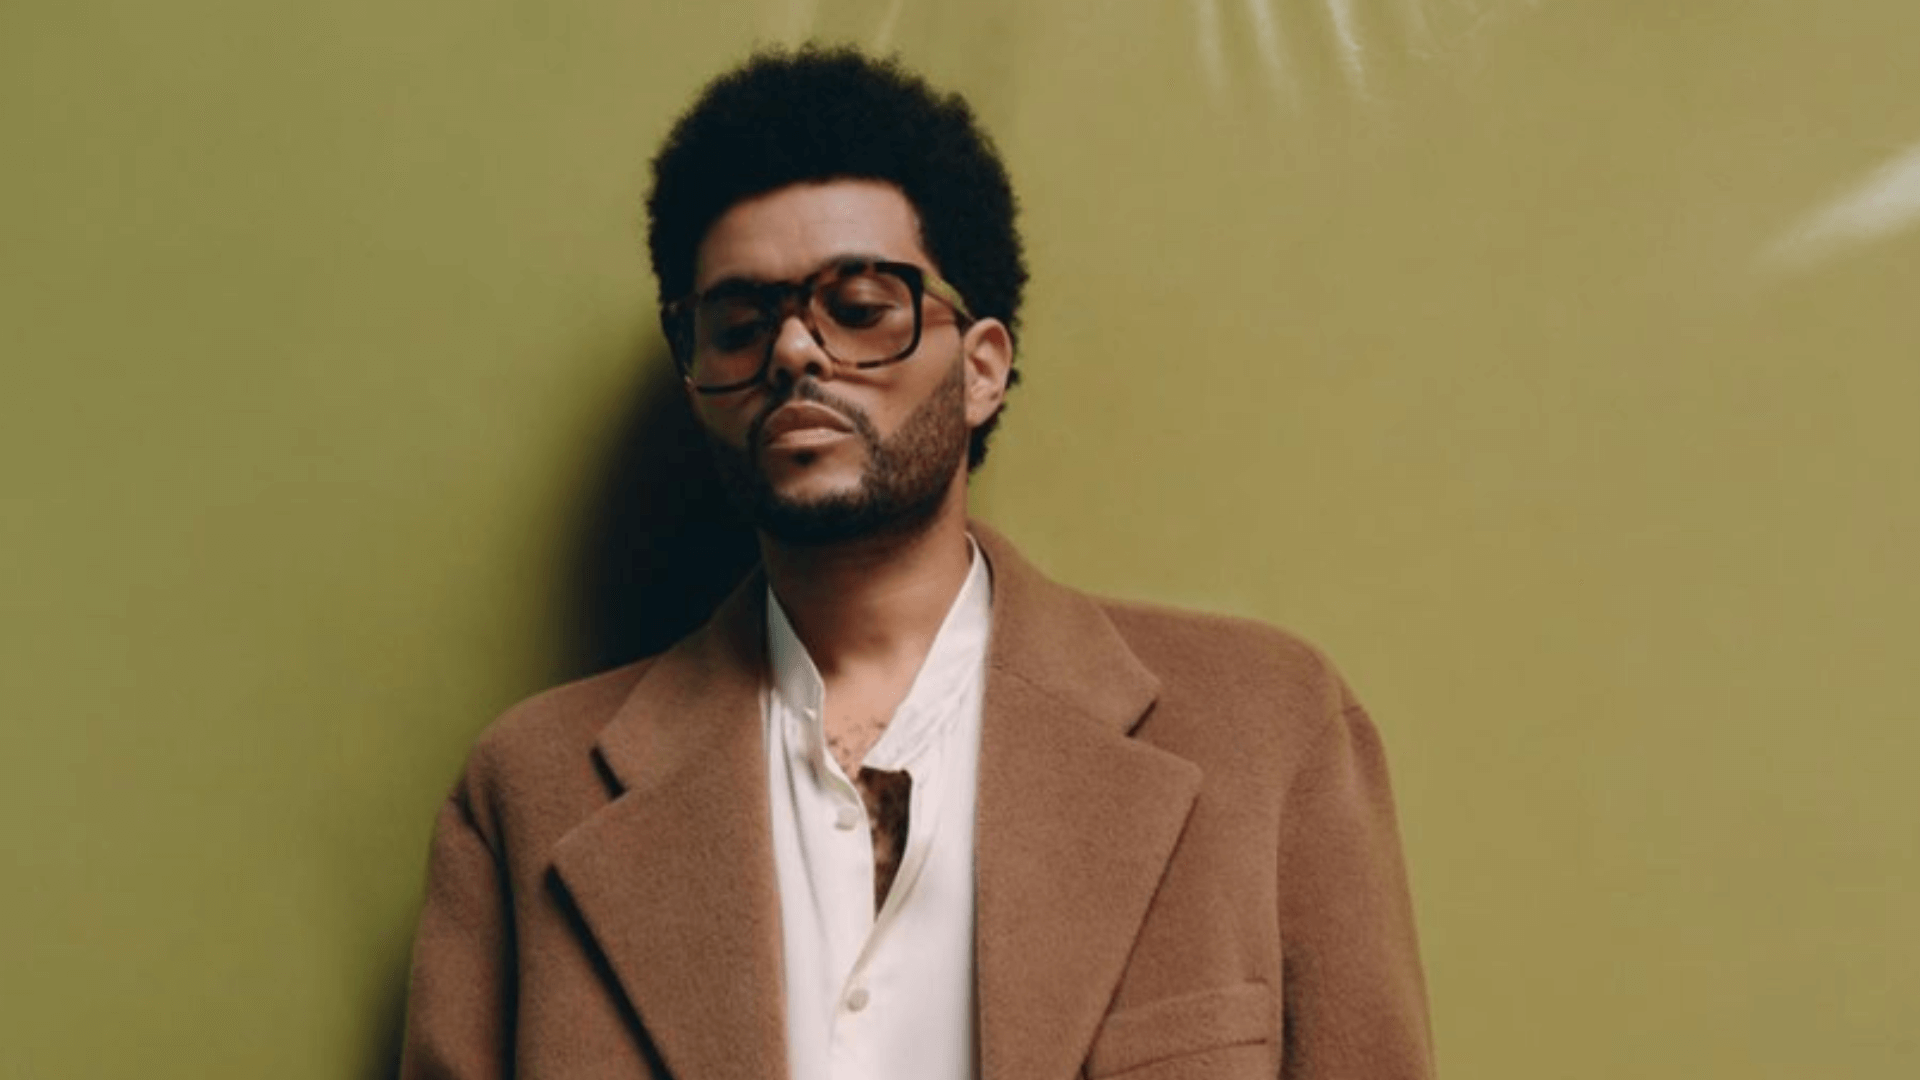 The Weeknd wearing a brown trenchcoat